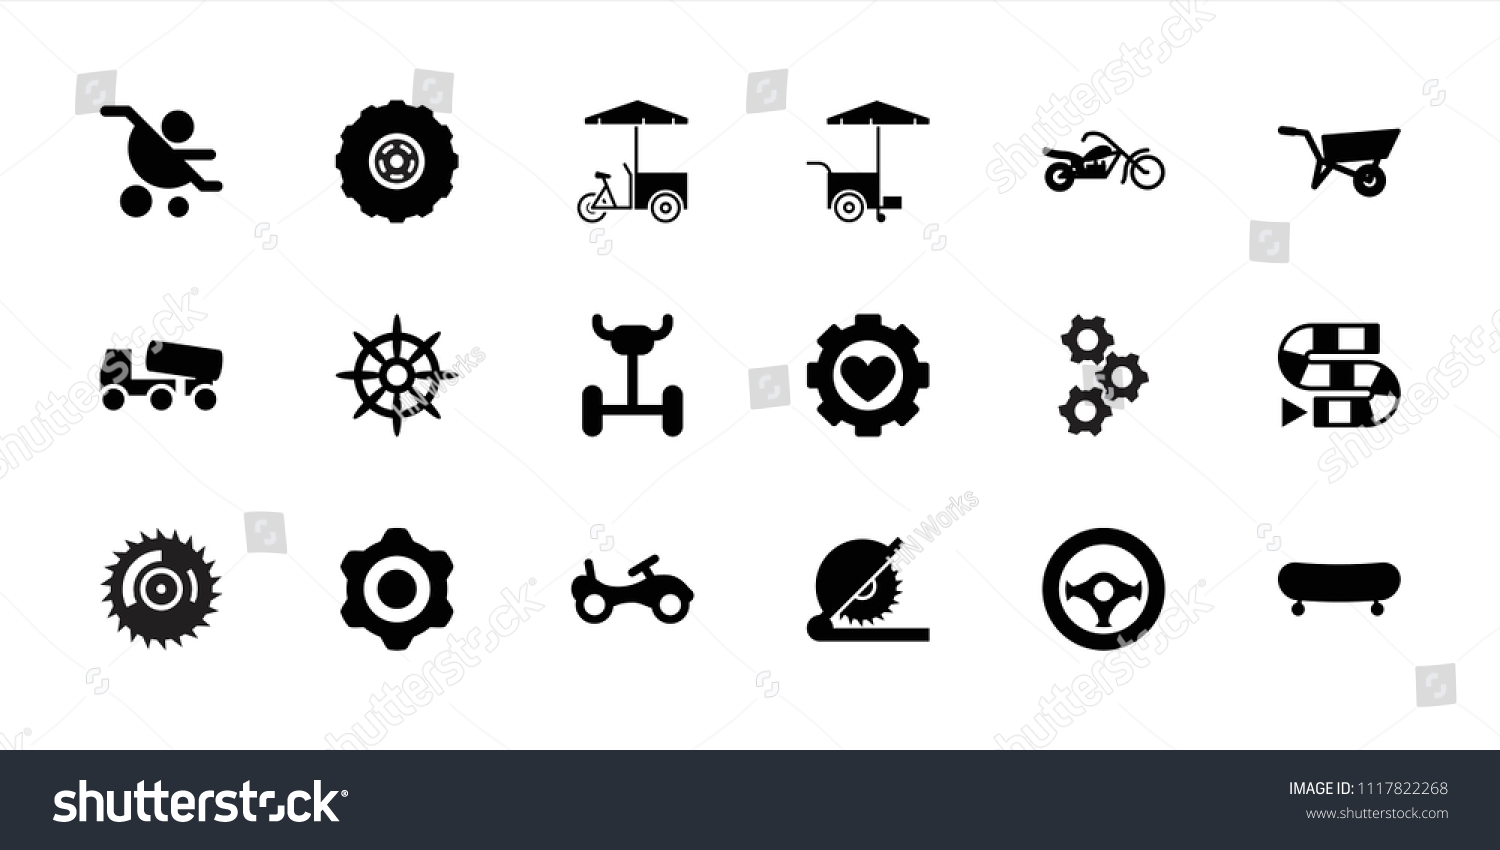 SVG of Wheel icon. collection of 18 wheel filled icons such as bike, concrete mixer, dice game, skate, baby carriage, fast food cart, helm. editable wheel icons for web and mobile. svg